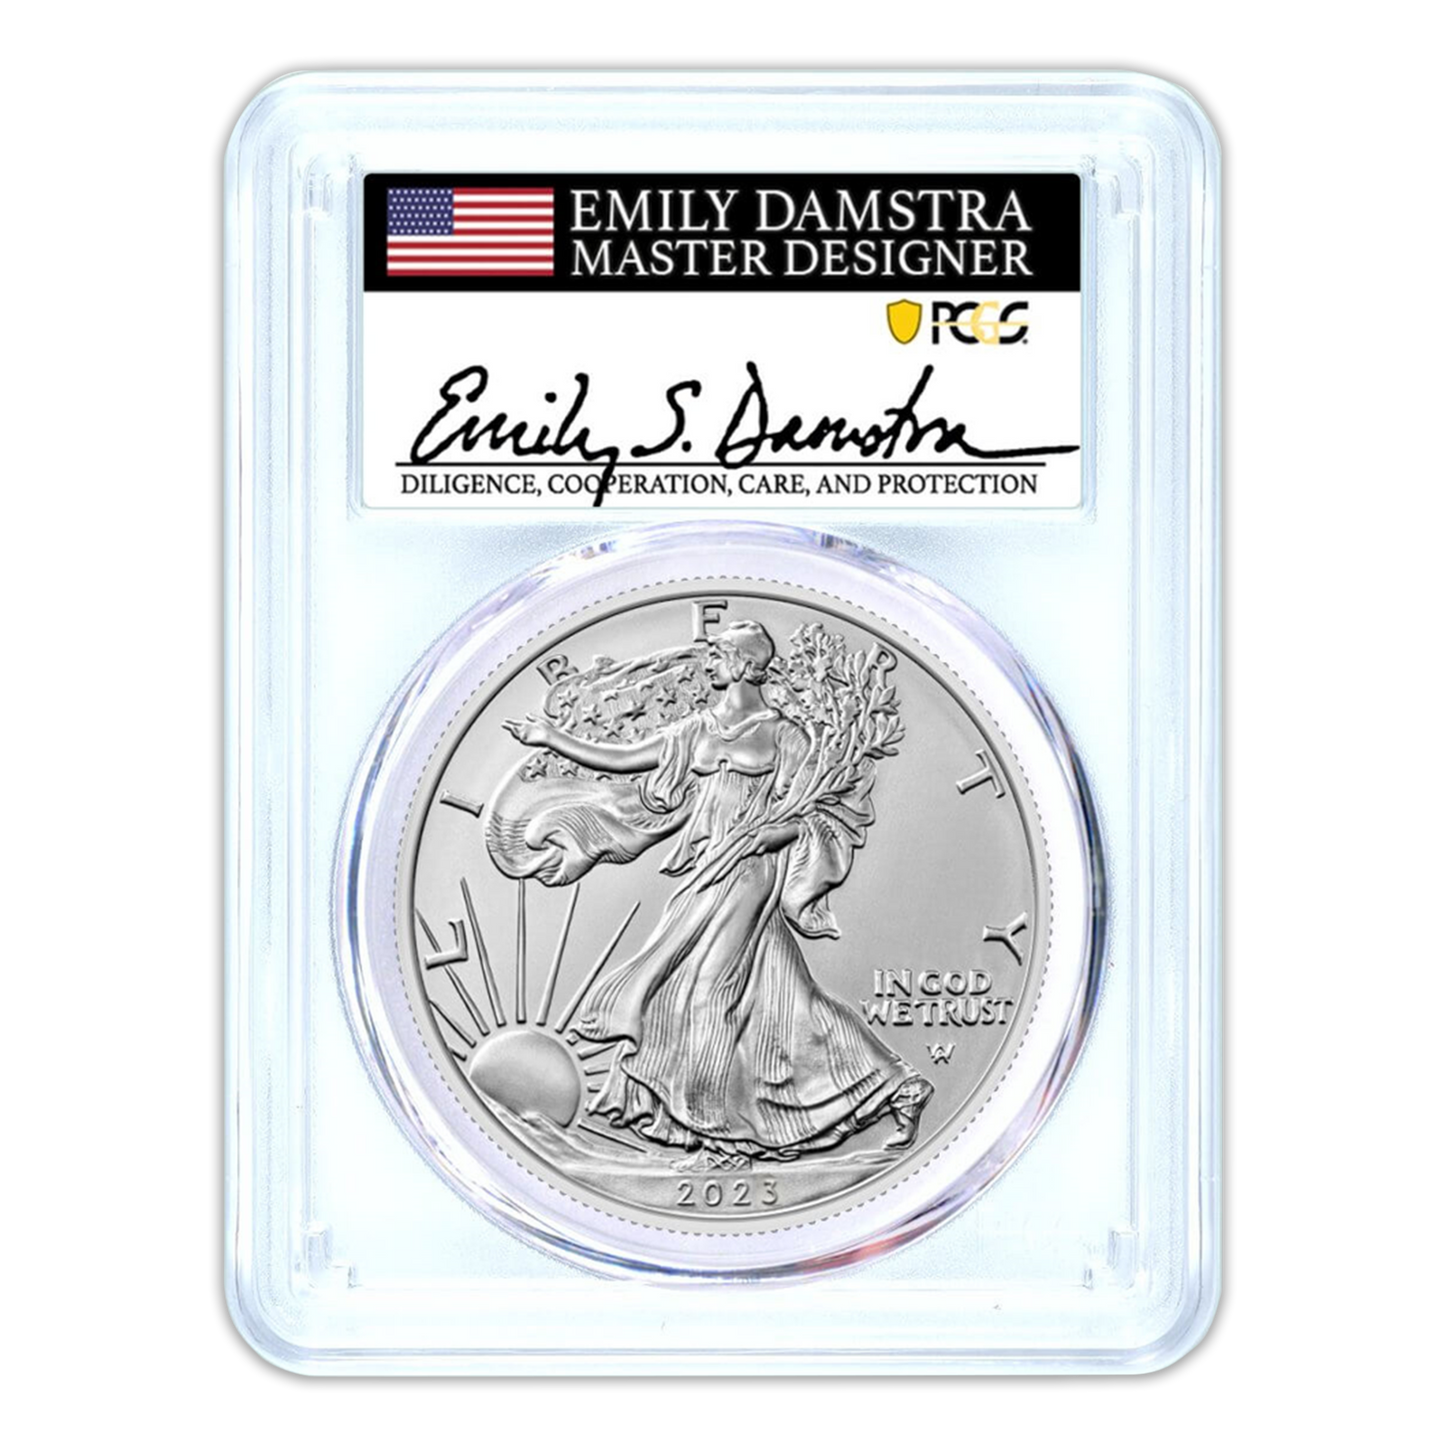 2023 Silver Eagle West Point Burnished - PCGS SP70 First Day of Issue - Emily Damstra Signature Label